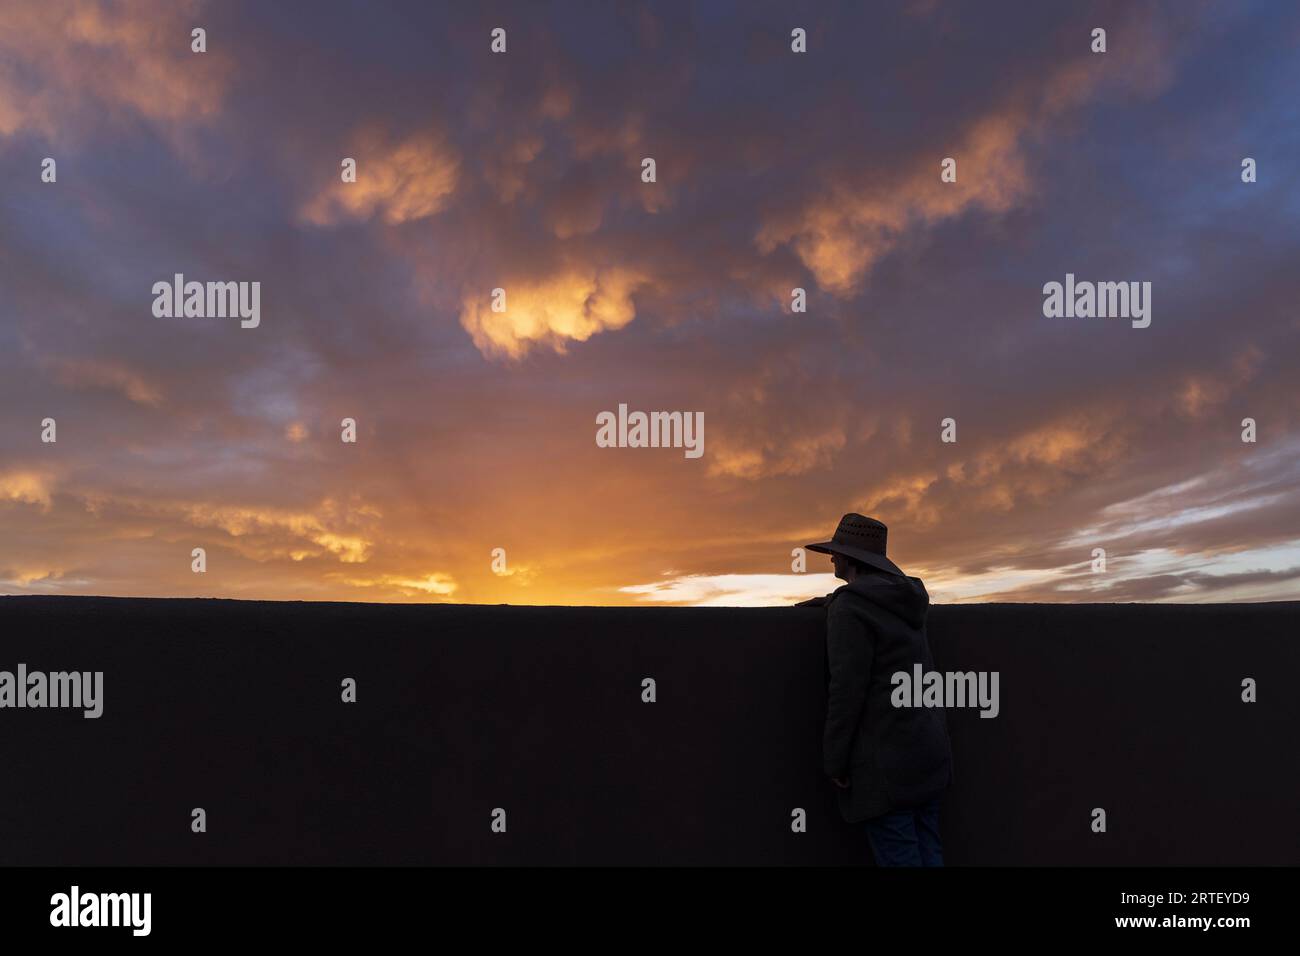 Silhouette of man in hat looking at sunset Stock Photo